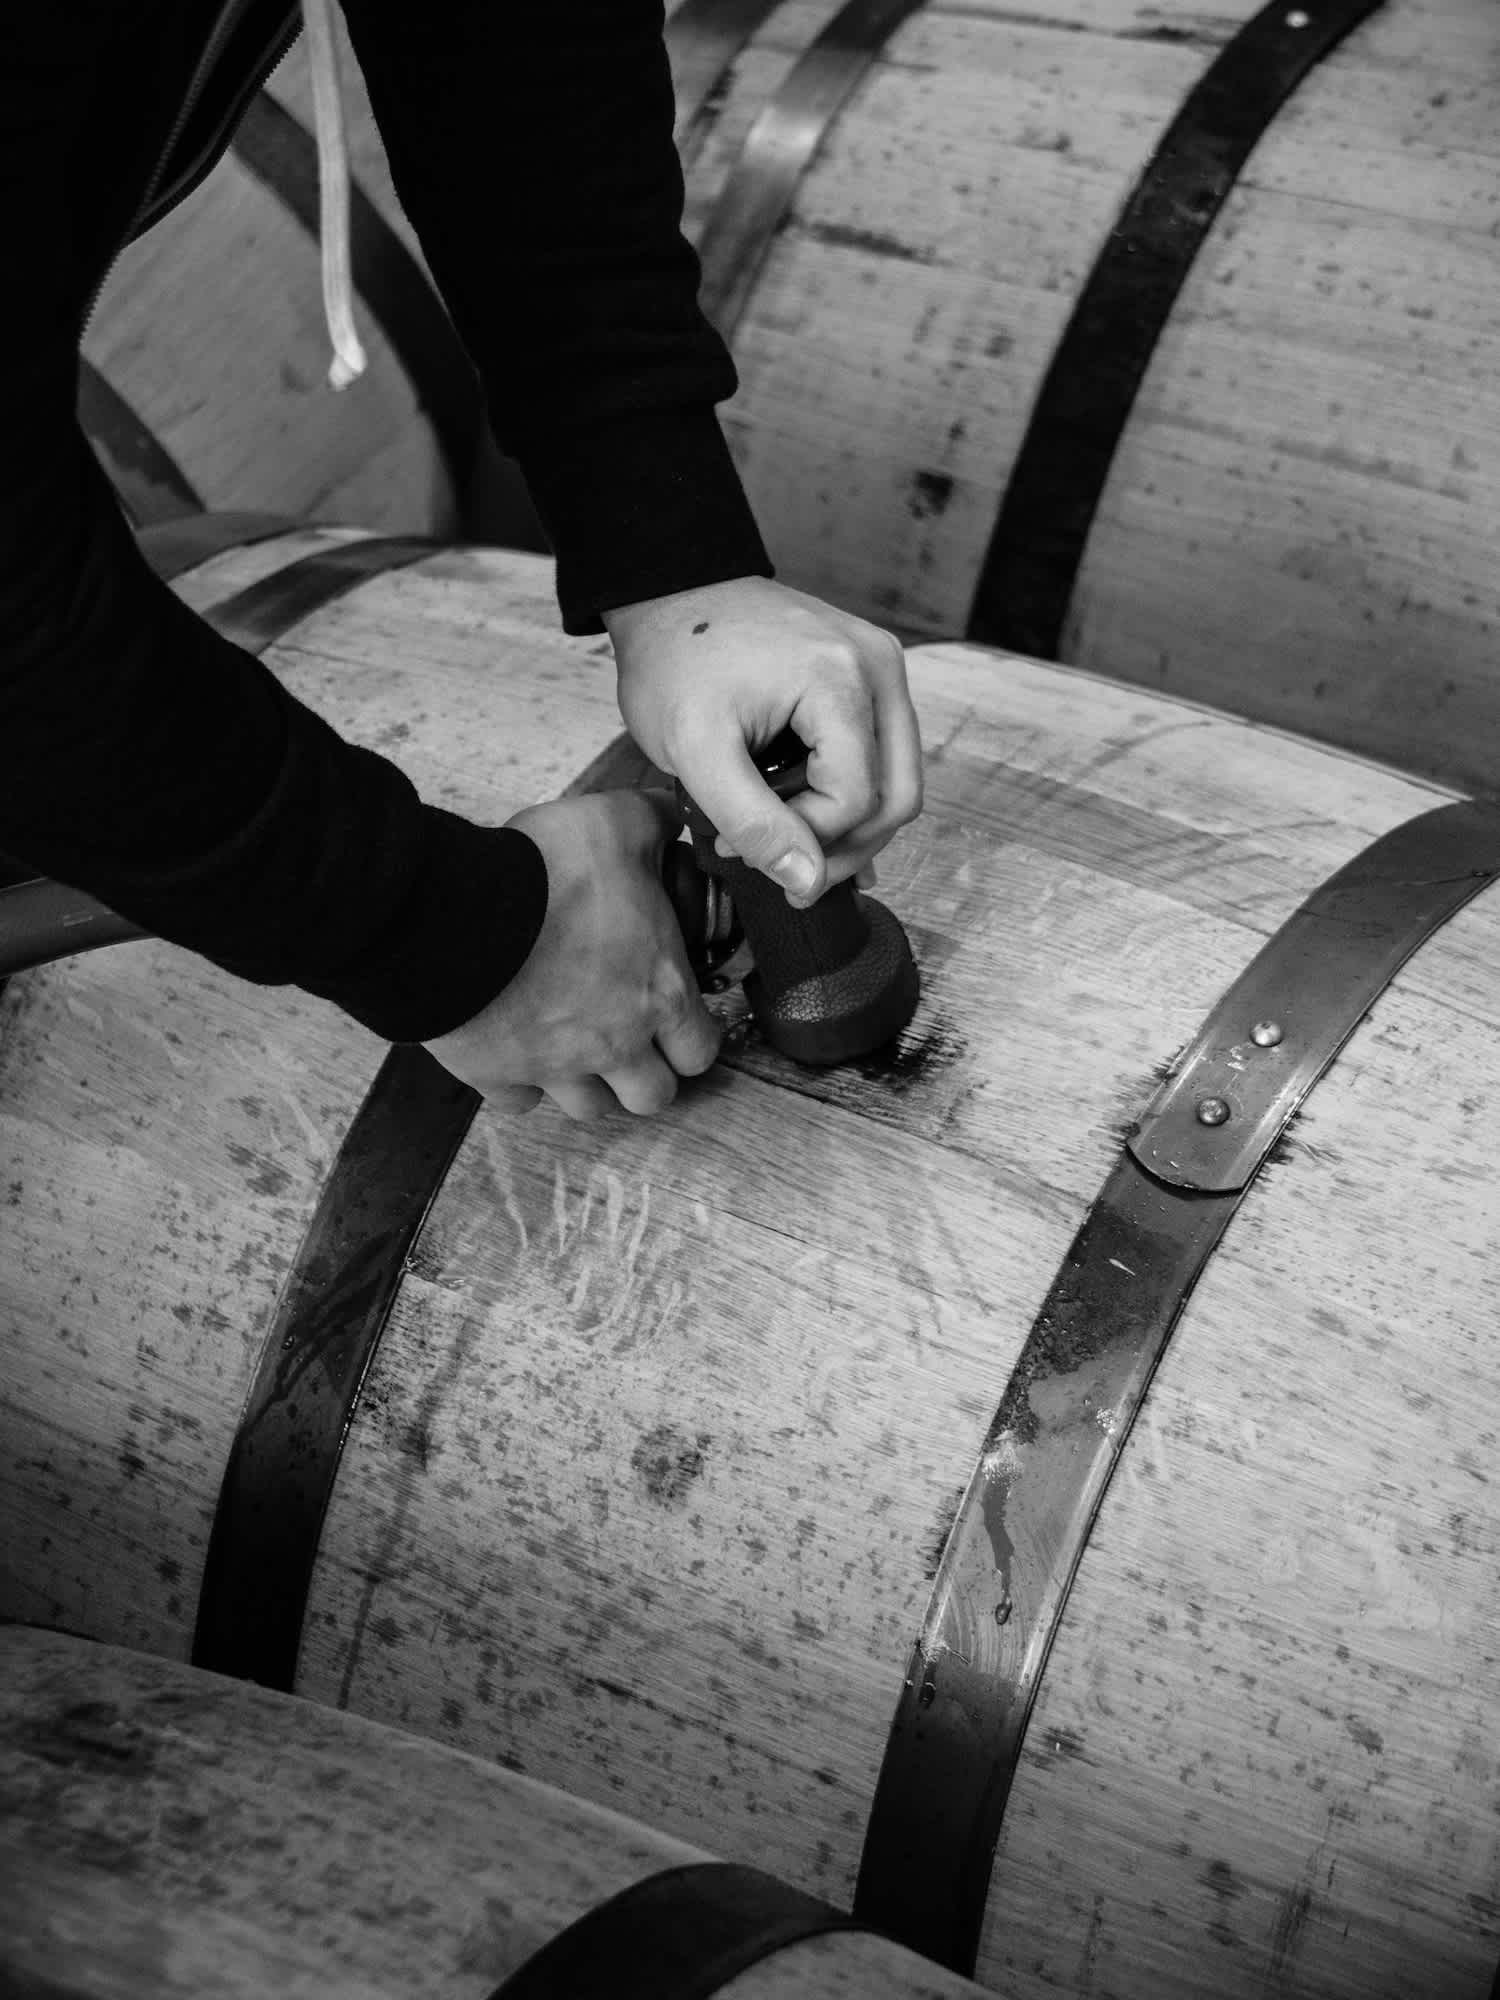 Black and white image of a person filling a barrel with alcohol